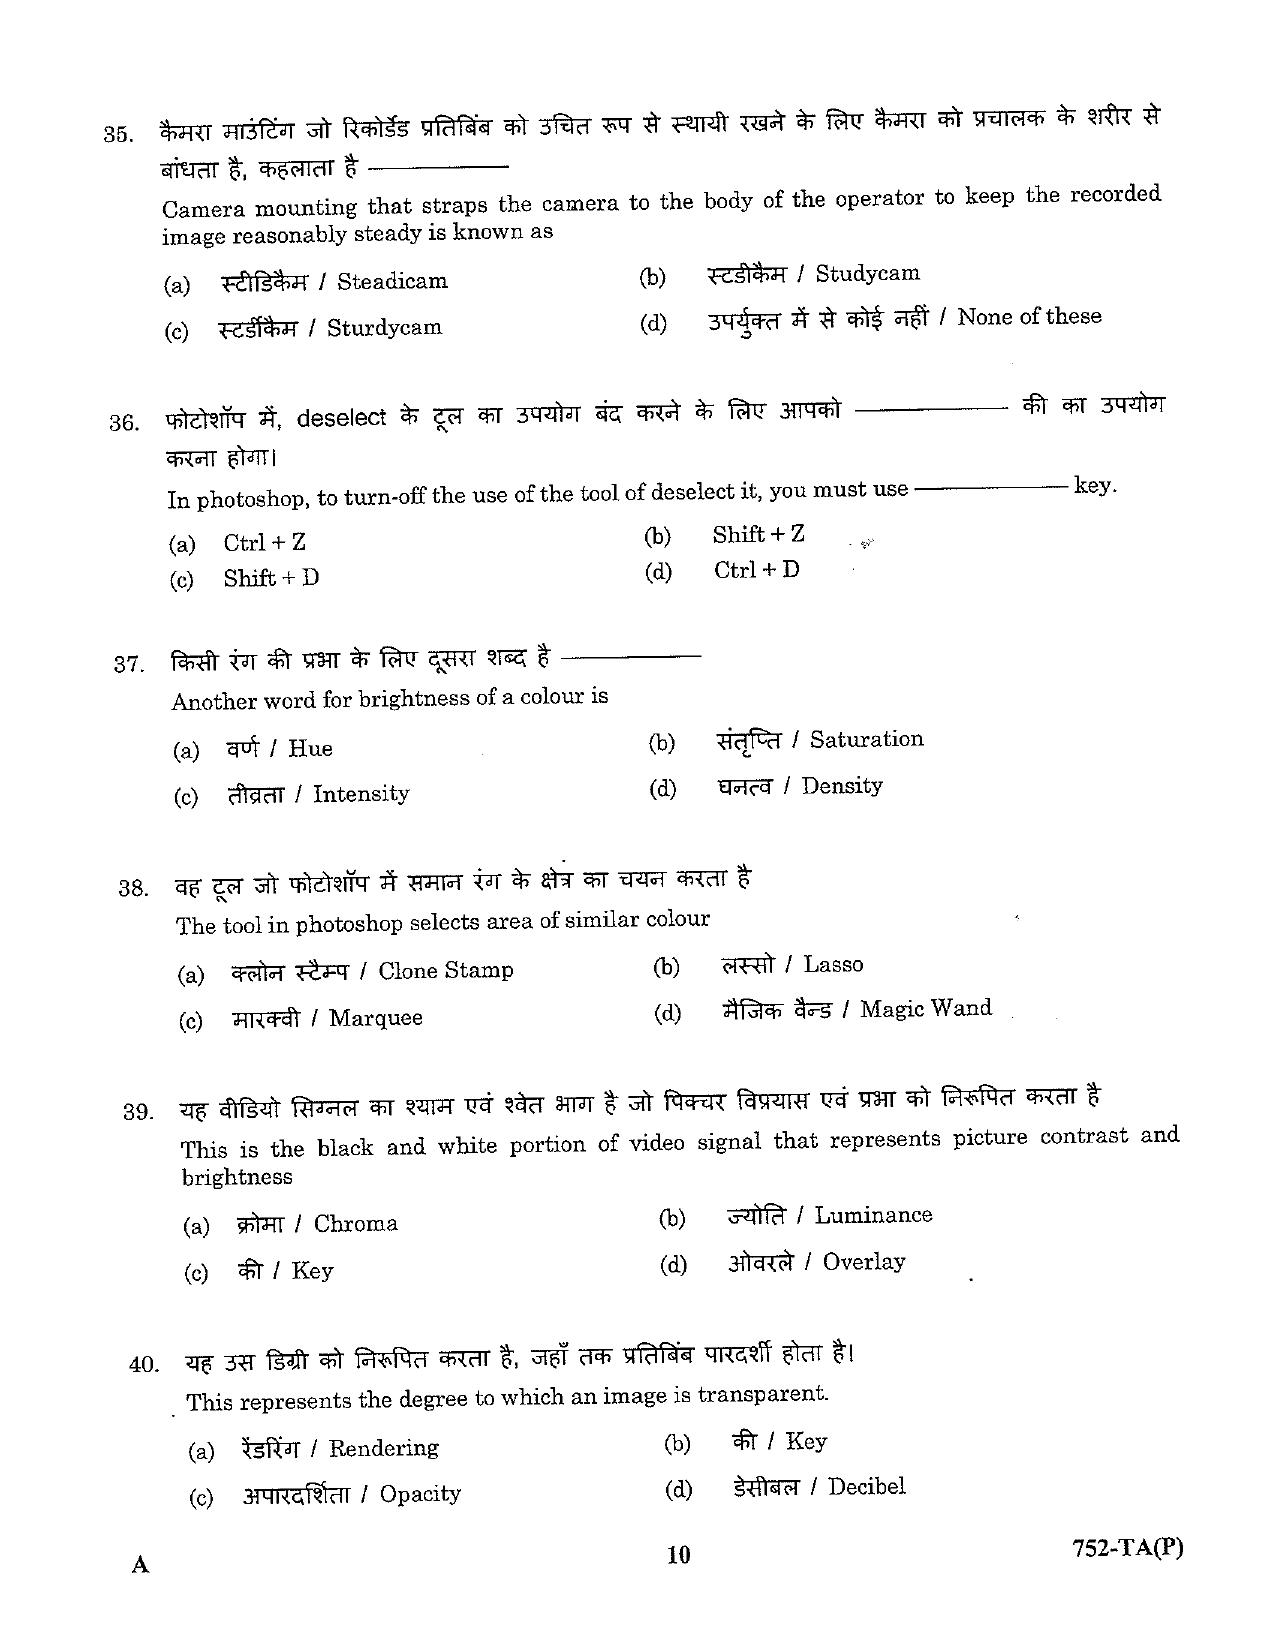 LPSC Technical Assistant (Photography) 2023 Question Paper - Page 10